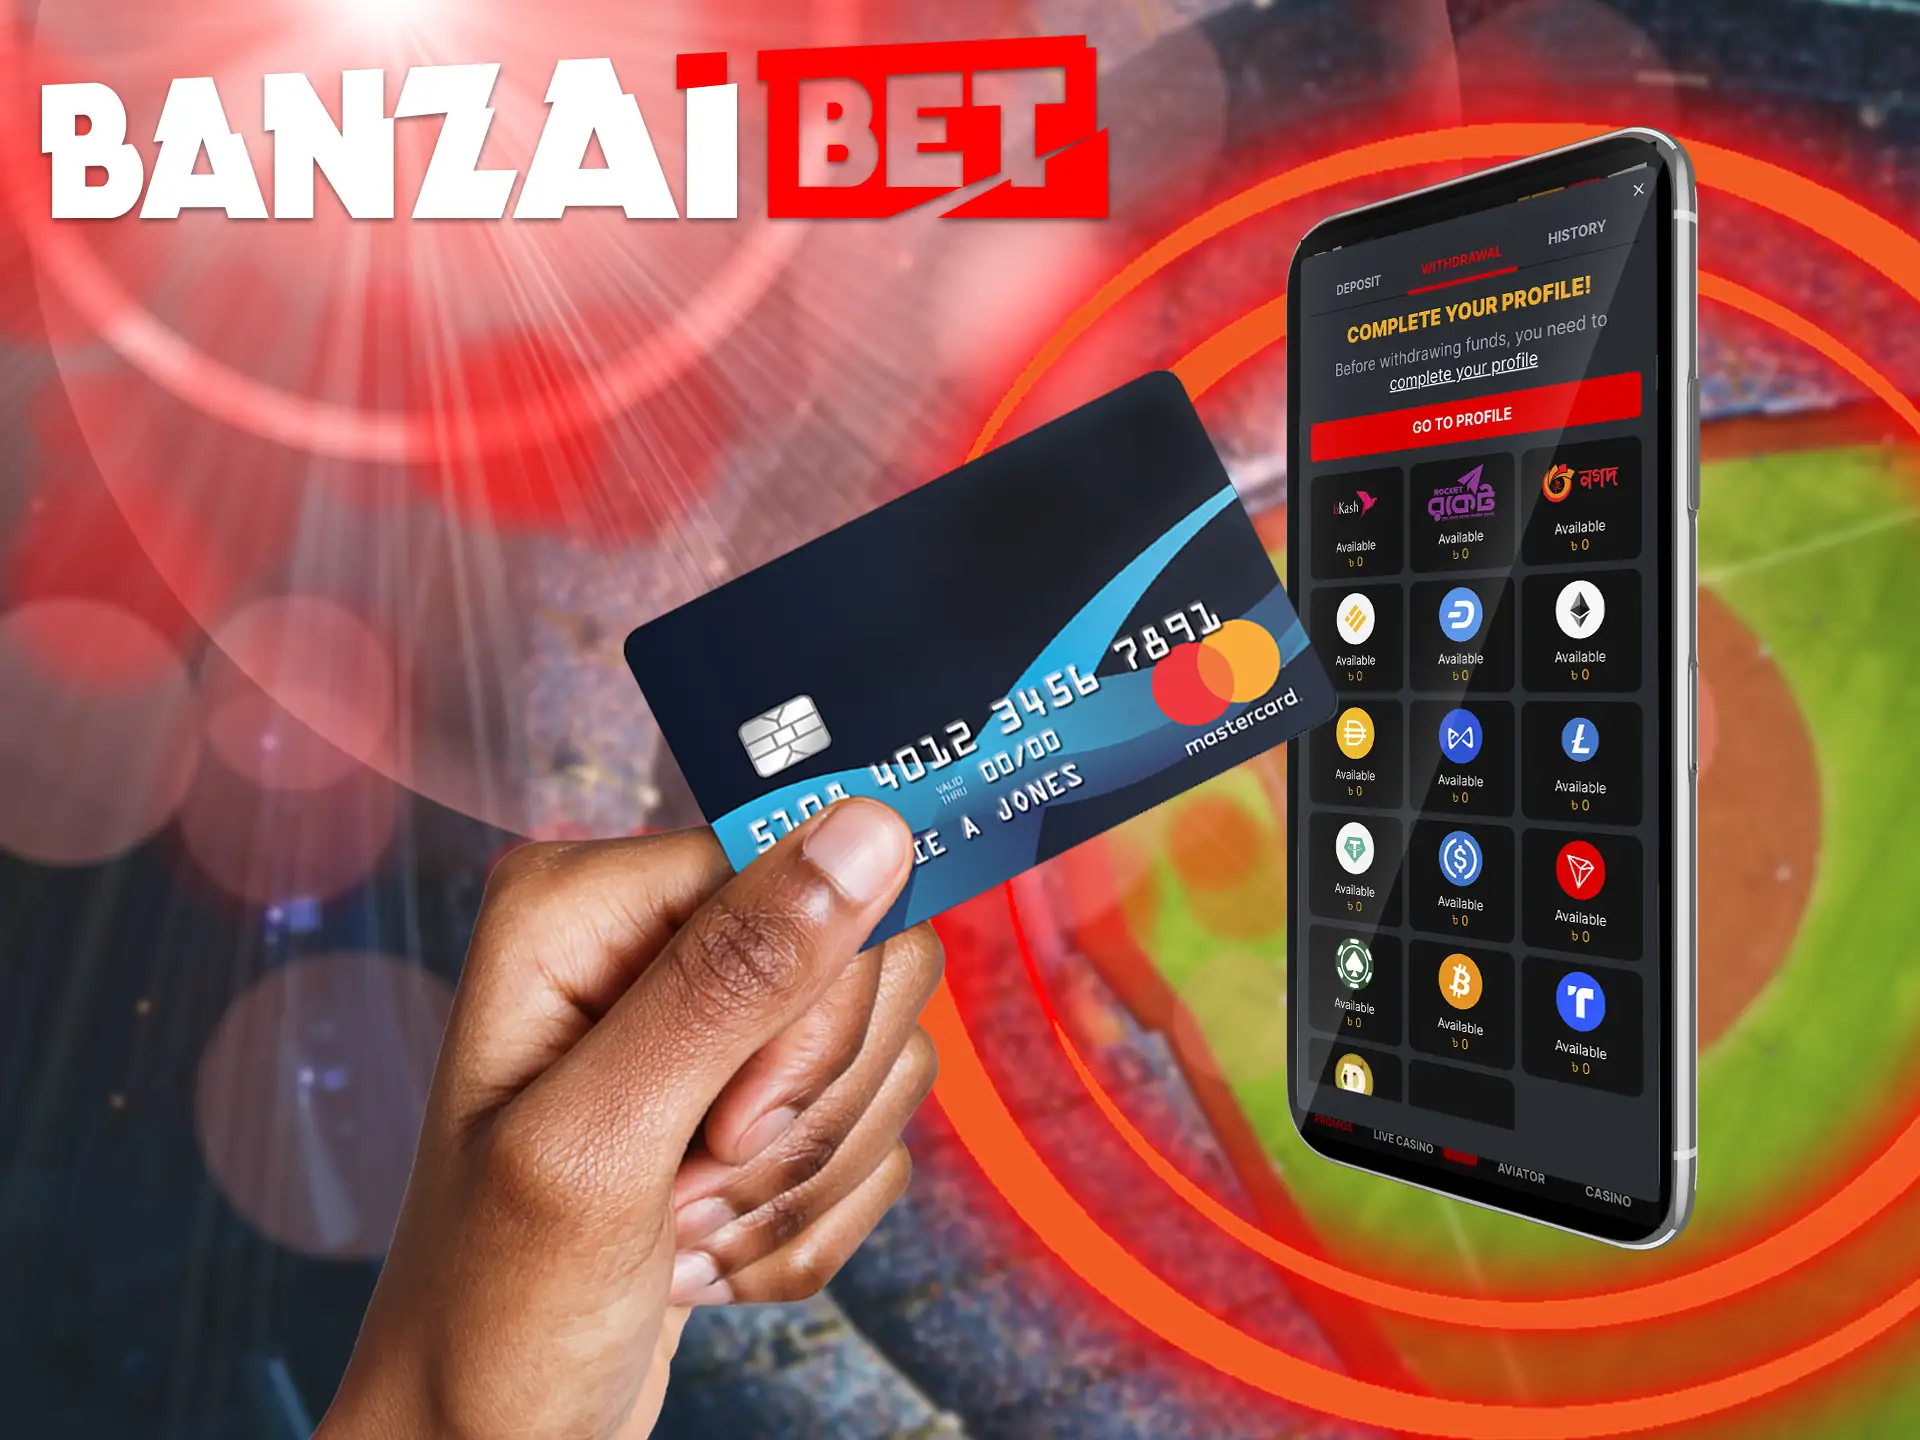 If you have won money on your account in Banzai App and do not know how to get it - then our article will help you.